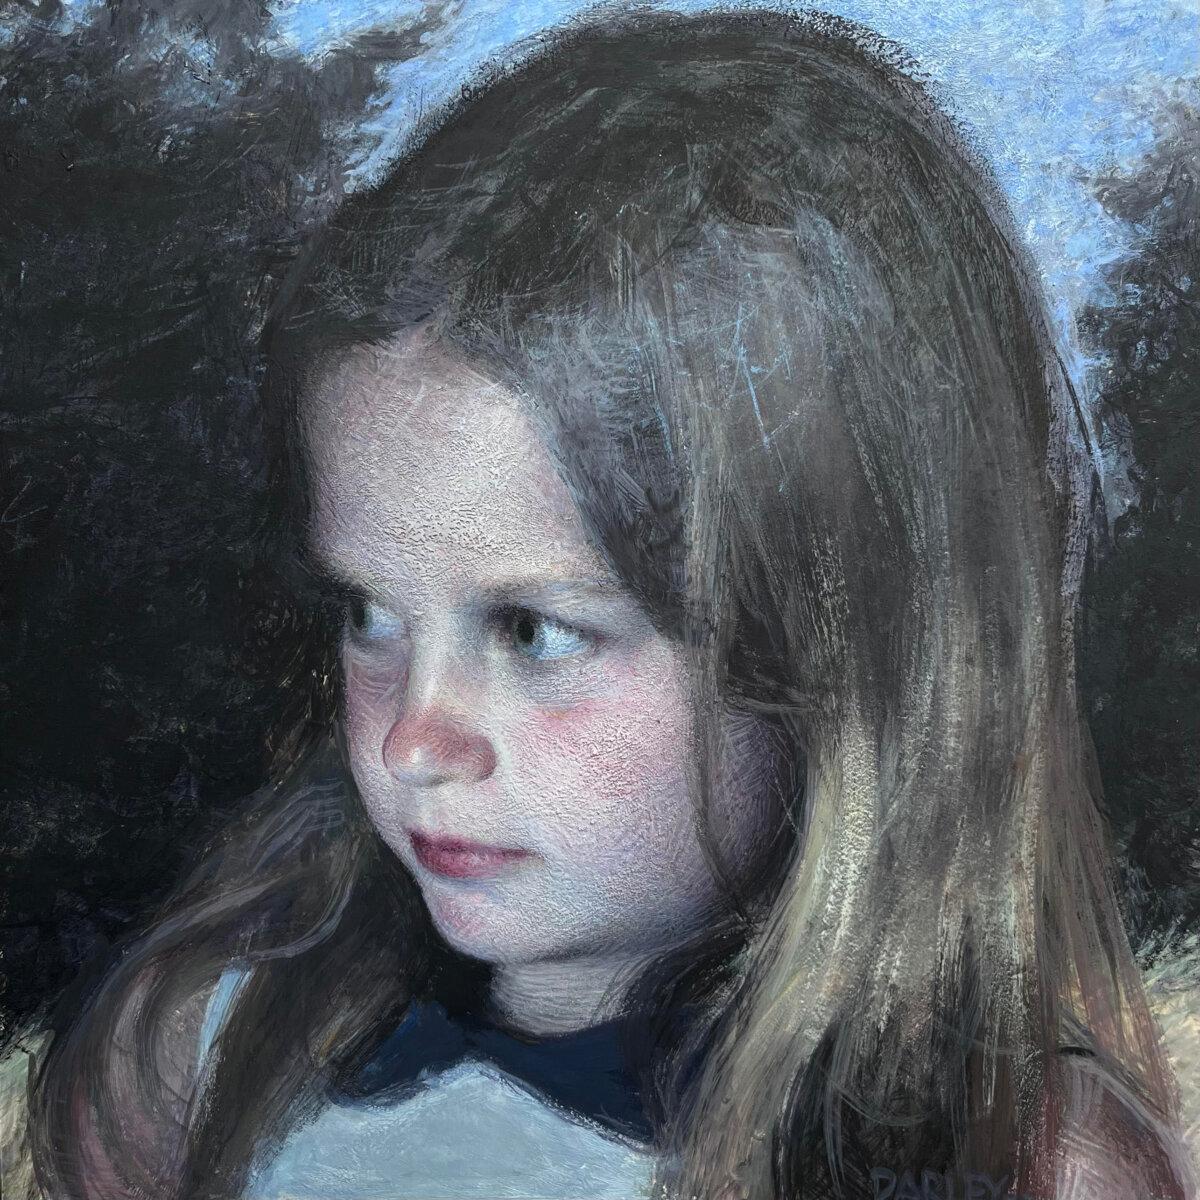 “Madelyn” by John Darley. Egg tempera on panel; 10 inches by 10 inches. (Courtesy of John Darley)